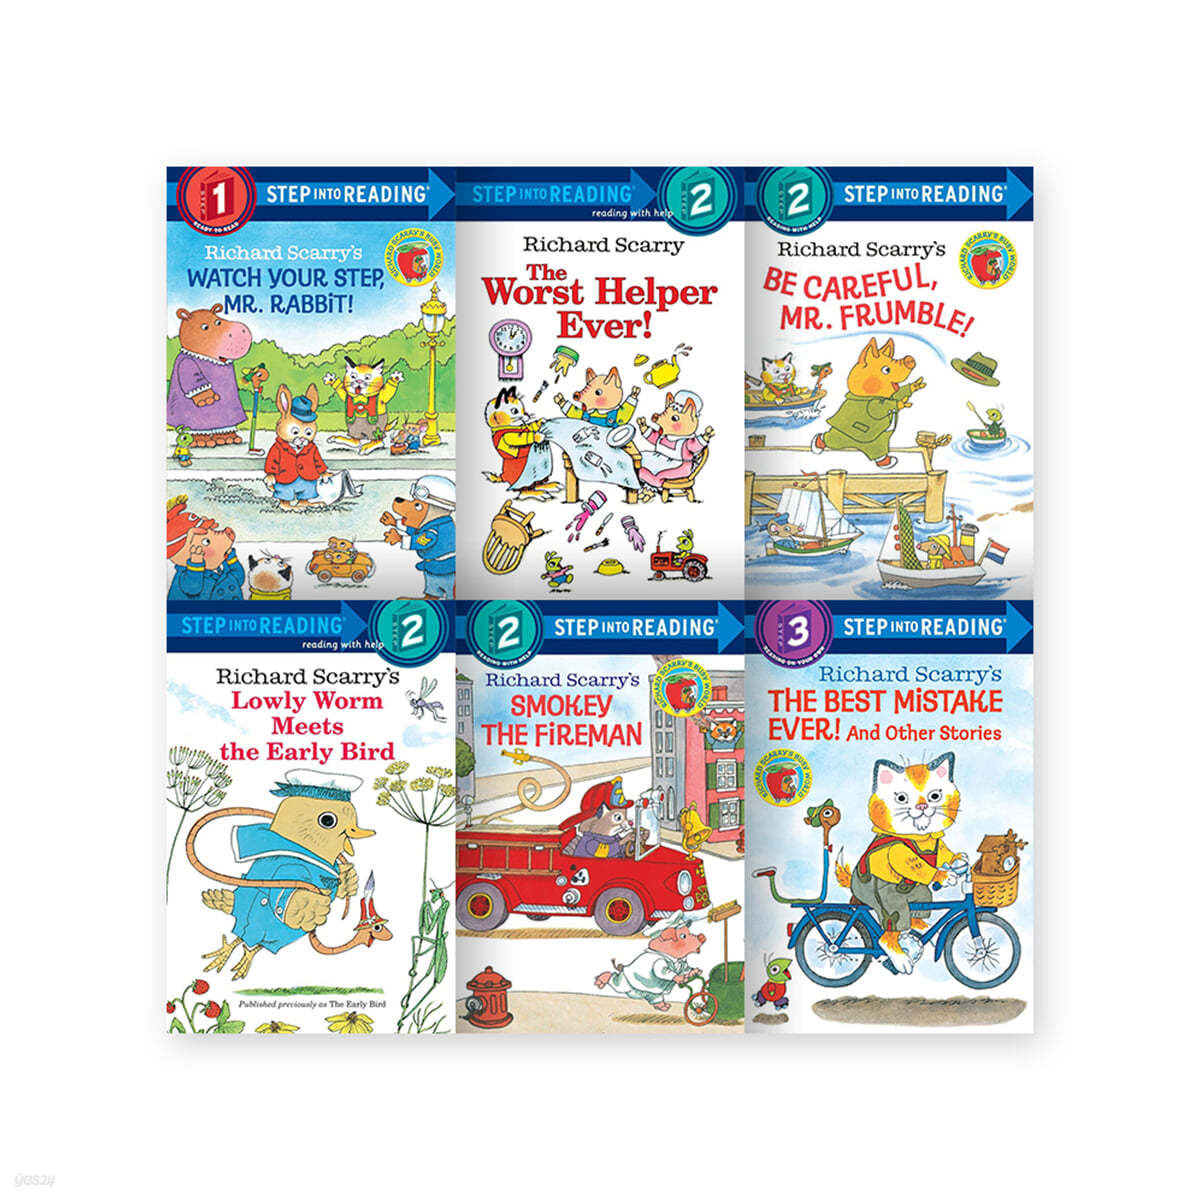 Step into Reading(Step1,2,3): Richard Scarry 6종 세트